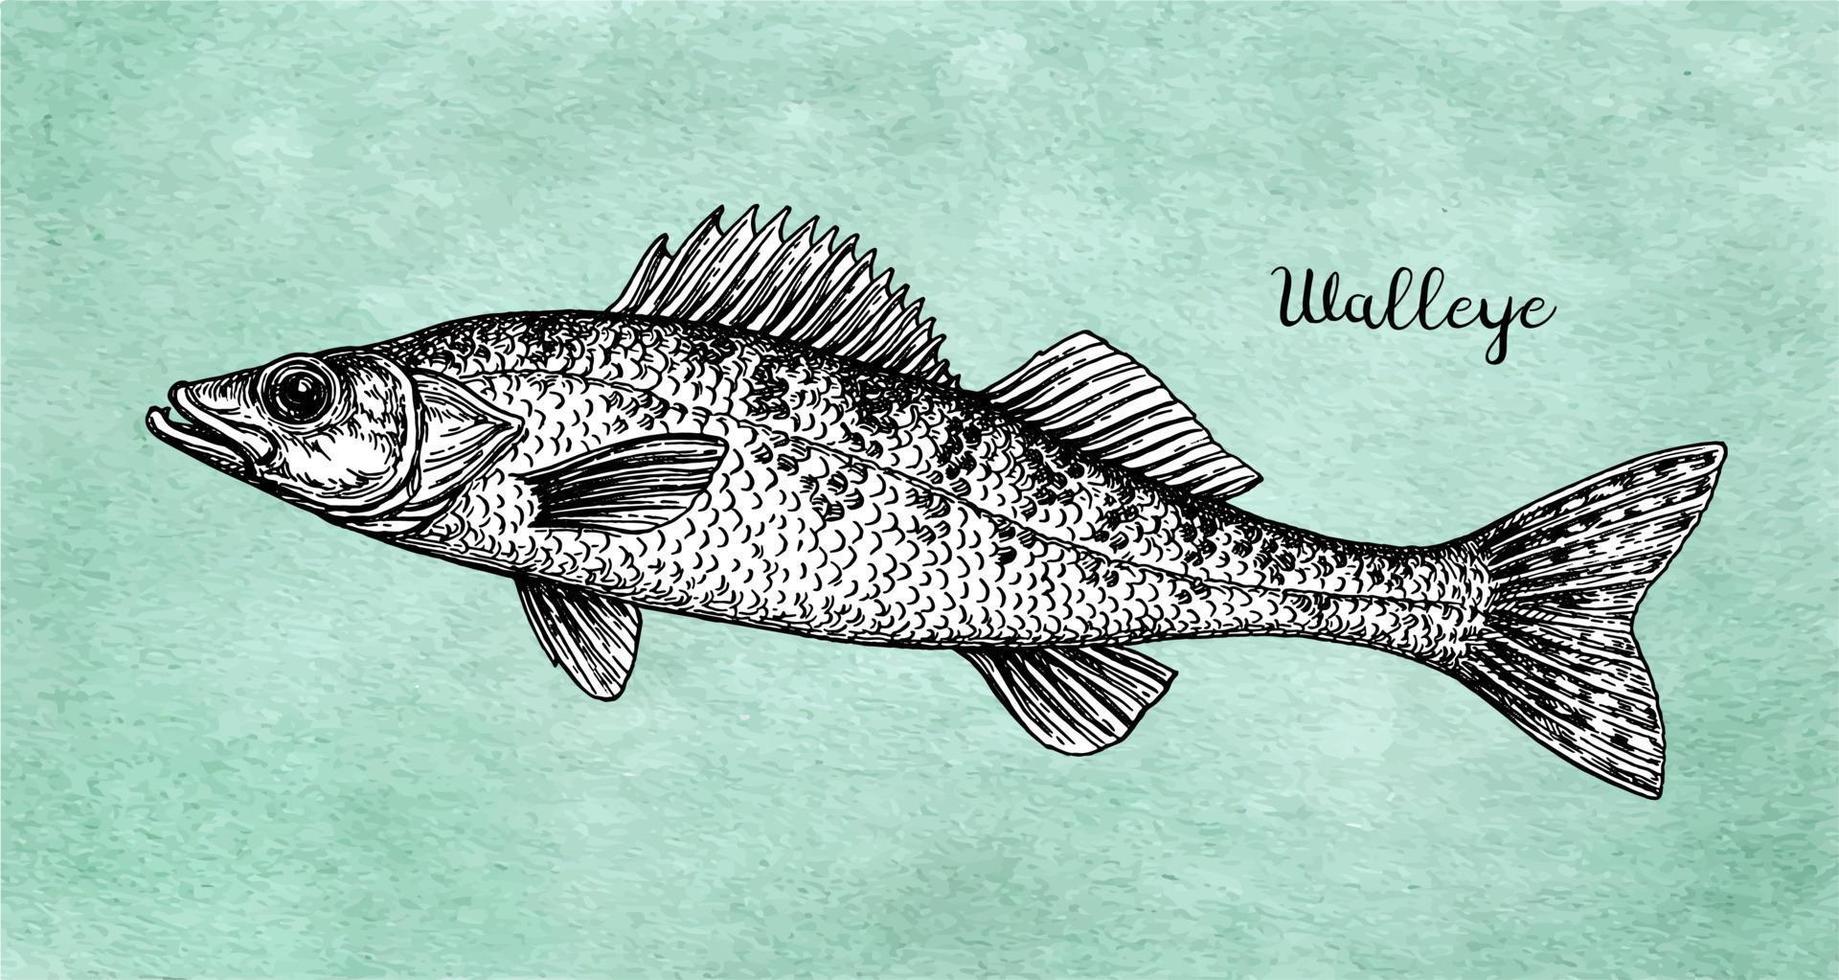 Walleye or yellow pike. Freshwater fish. Ink sketch on old paper background. Hand drawn vector illustration. Retro style.